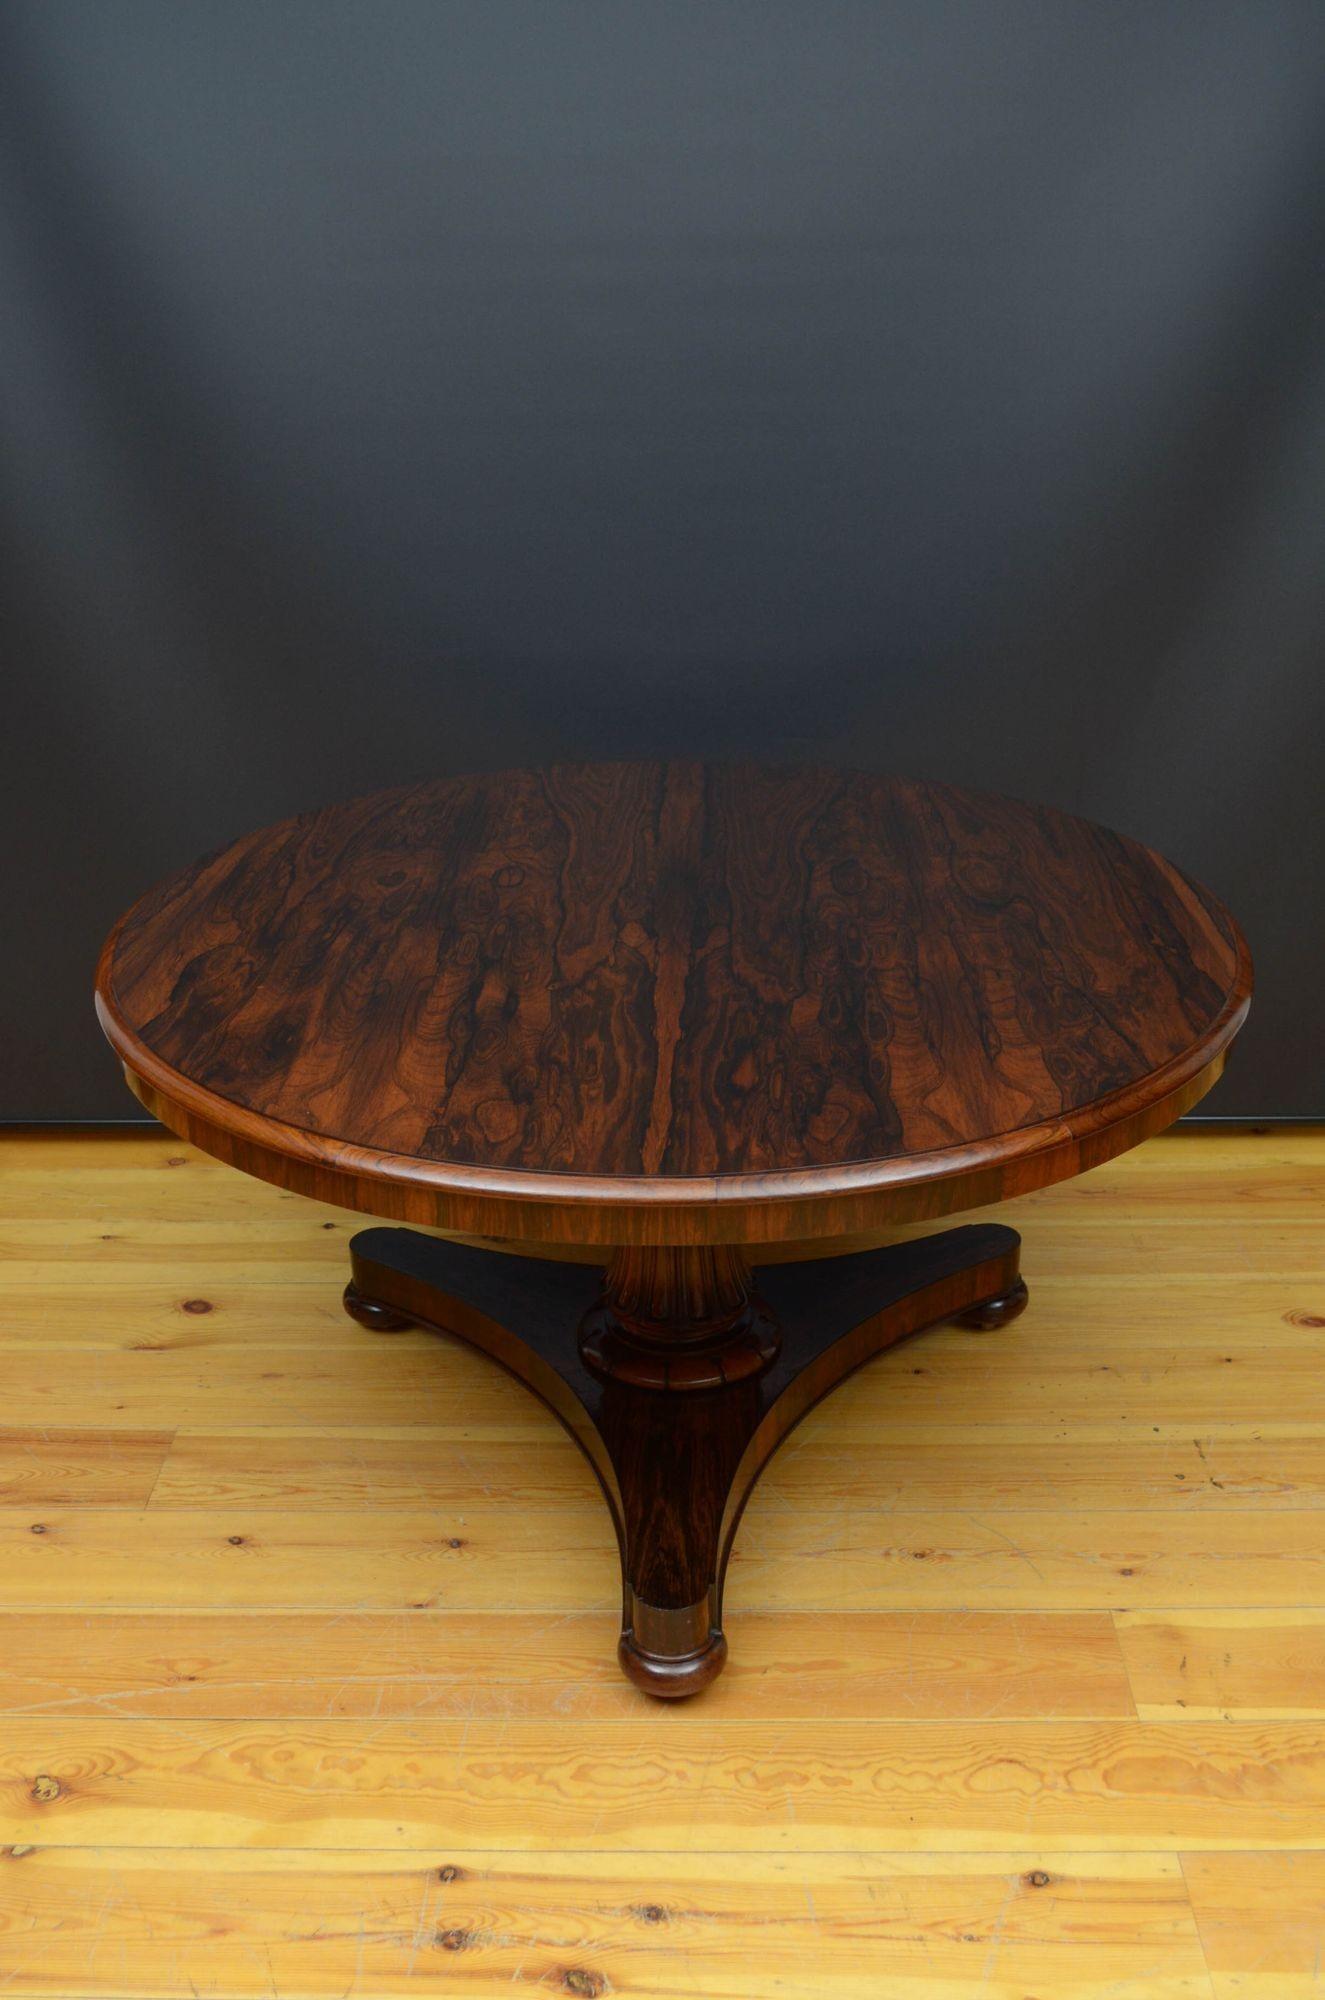 Sn5342 Fine William IV rosewood dining table or centre table, having tilt top with fantastic rosewood grain, standing on turned column with fluted decoration and carved collar terminating in trefoil base, bun feet and castors. This antique table is